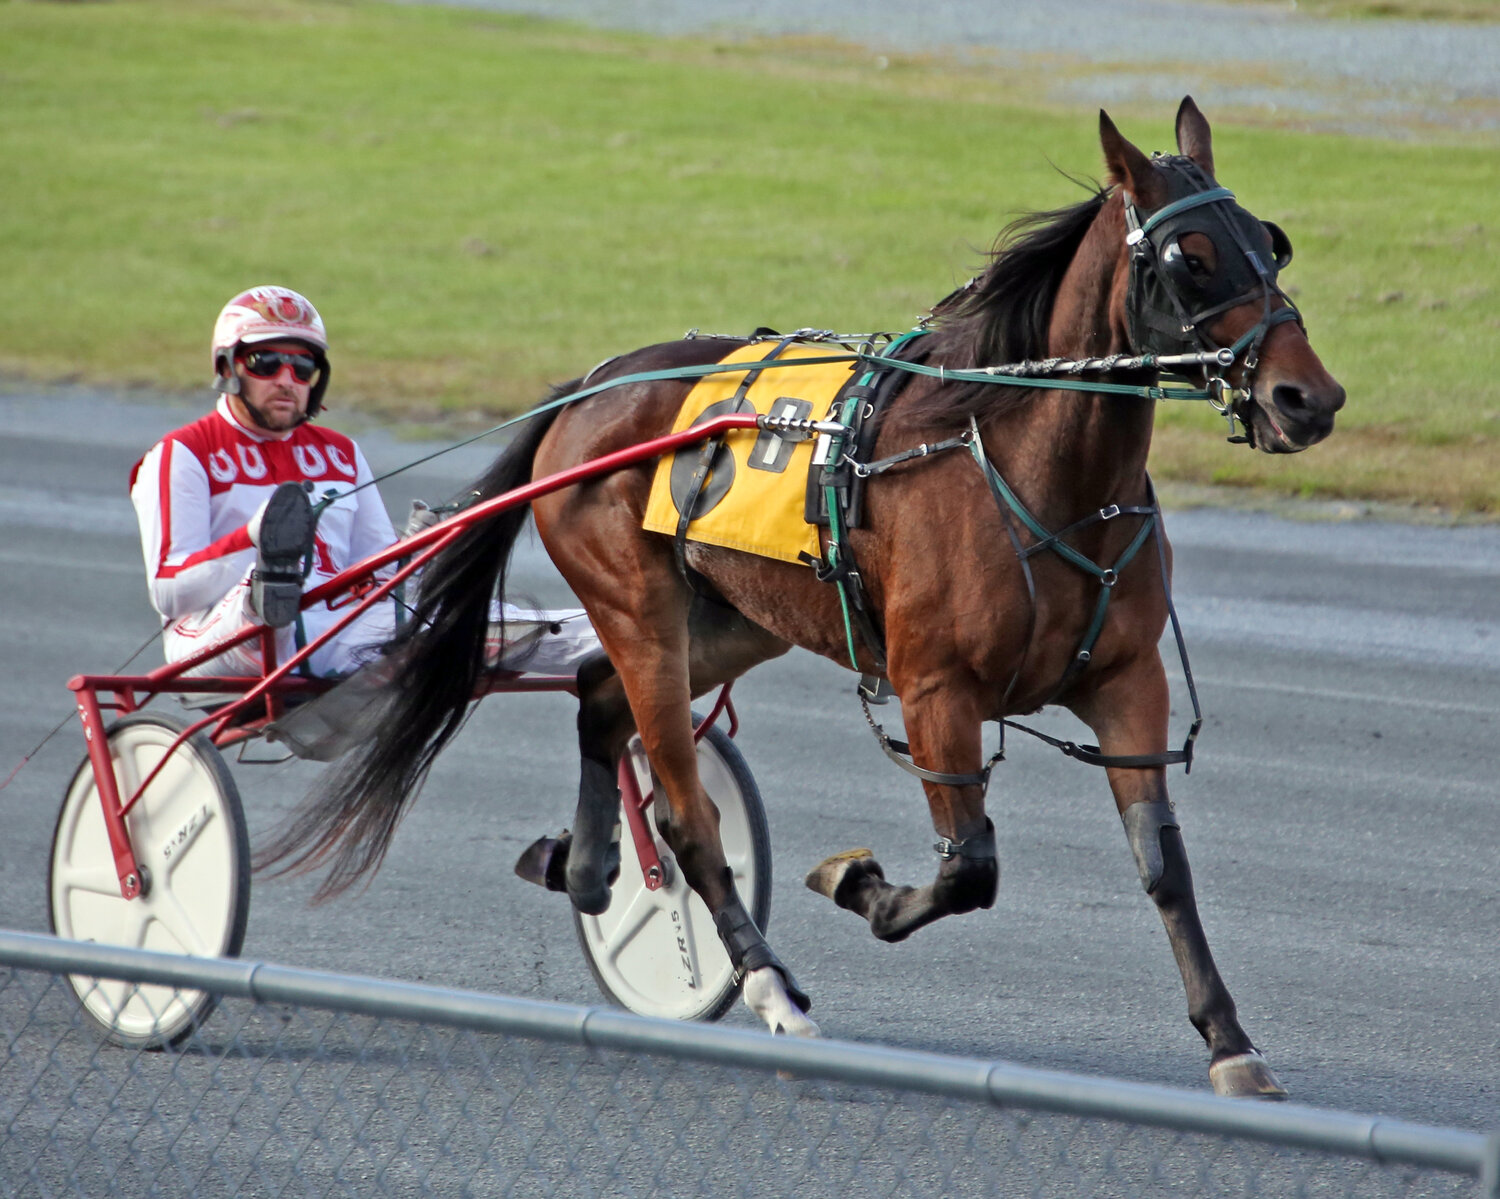 Allan Davis, who won the fall driving title at Harrington Raceway, guides Sumkindofmagic prior to the first race Wednesday night.